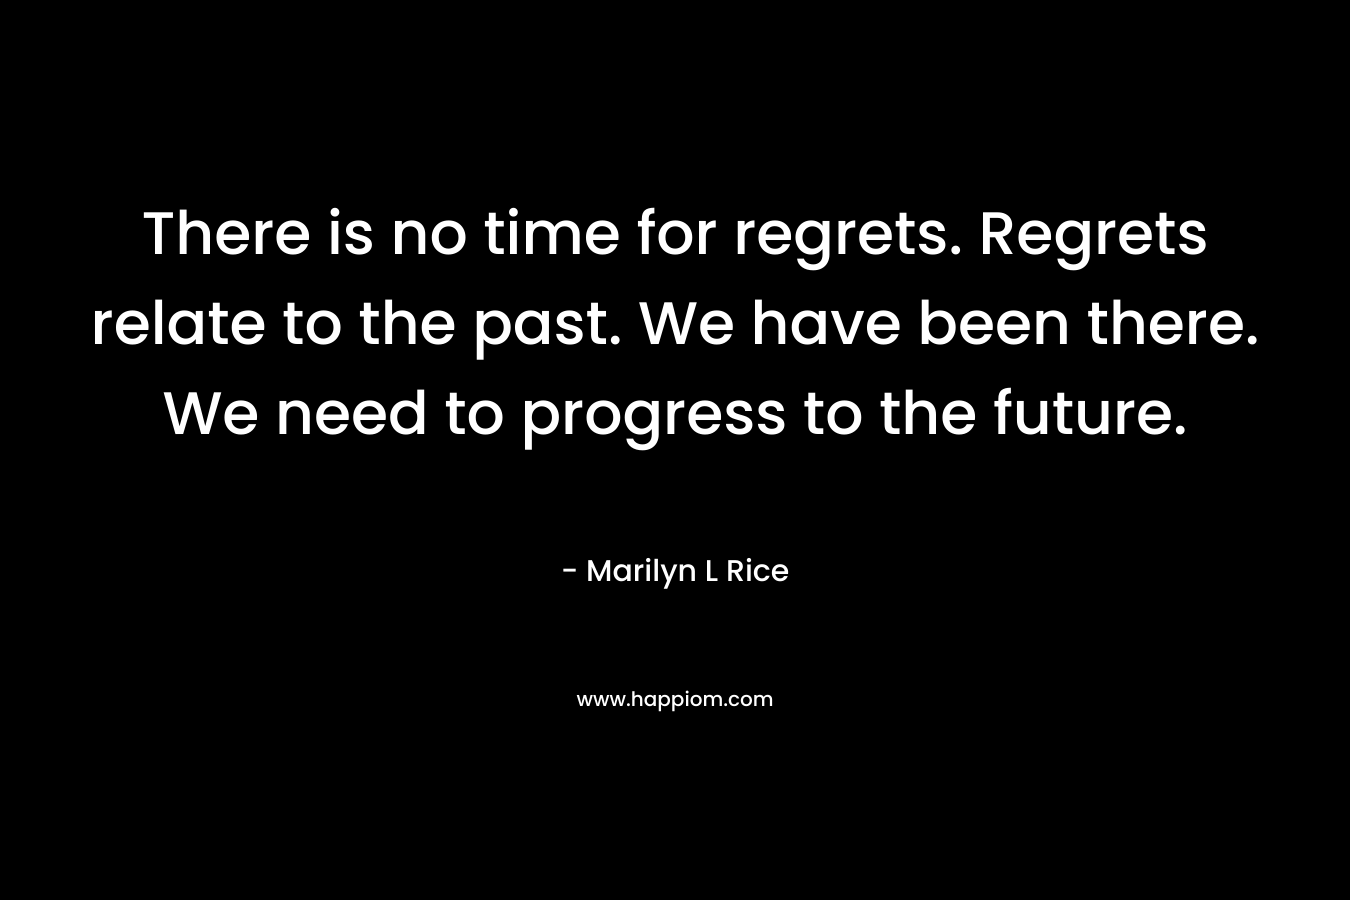 There is no time for regrets. Regrets relate to the past. We have been there. We need to progress to the future.